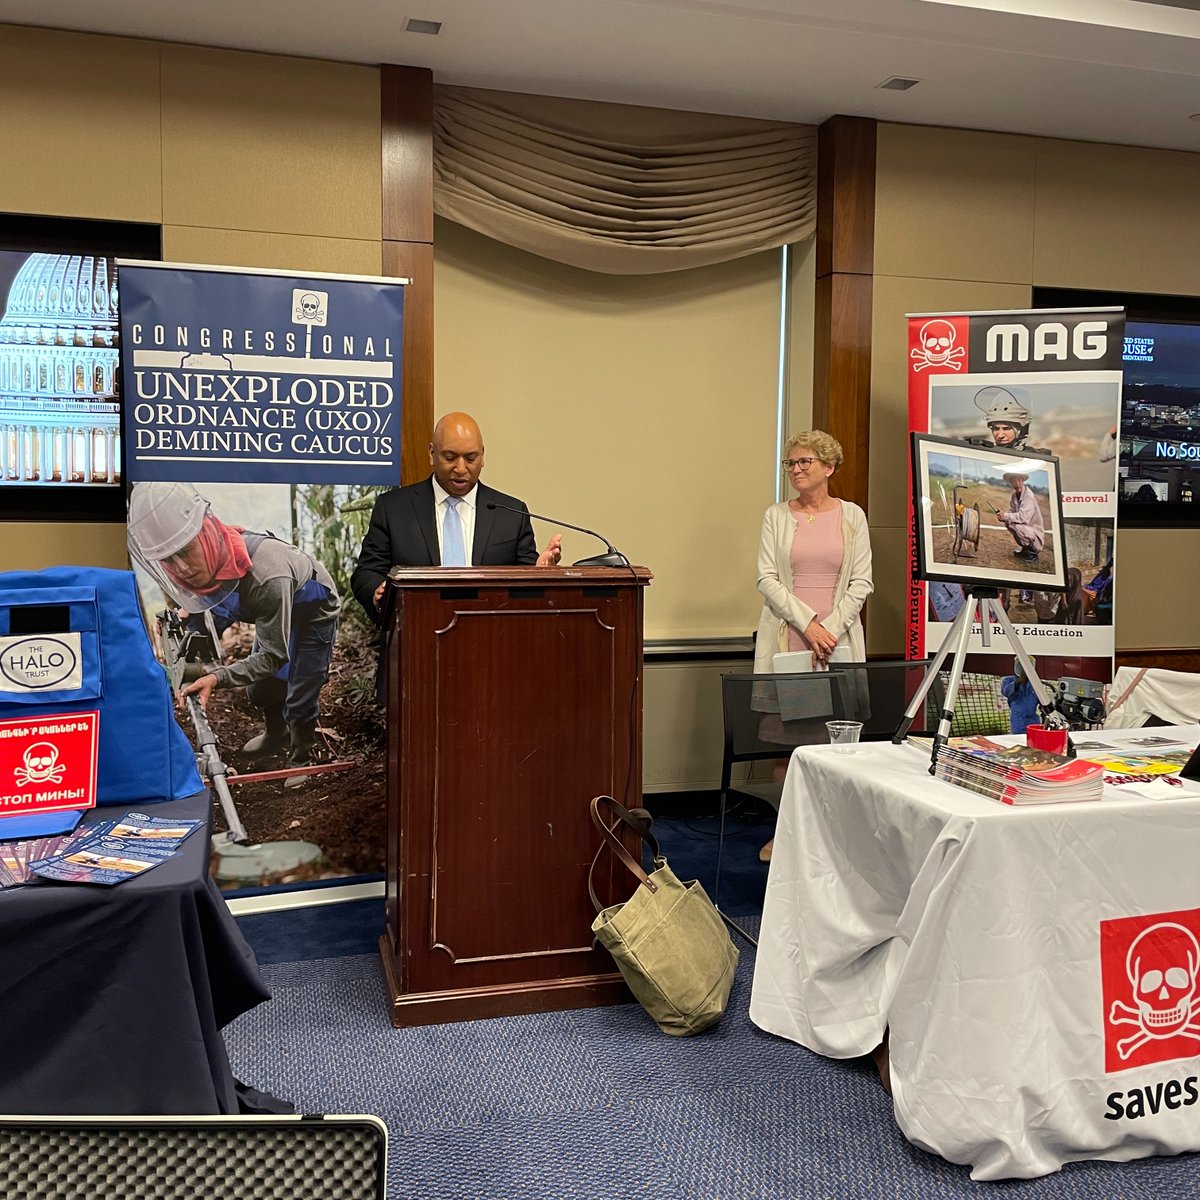 Yesterday, I celebrated Mine Awareness Day with @thehalotrust & the Congressional Unexploded Ordinance Caucus! As Co-Chair of the Caucus, I shared the progress of over 224,000 mines being cleared from FY 2023 budget funding and learned about more efforts for demining worldwide.